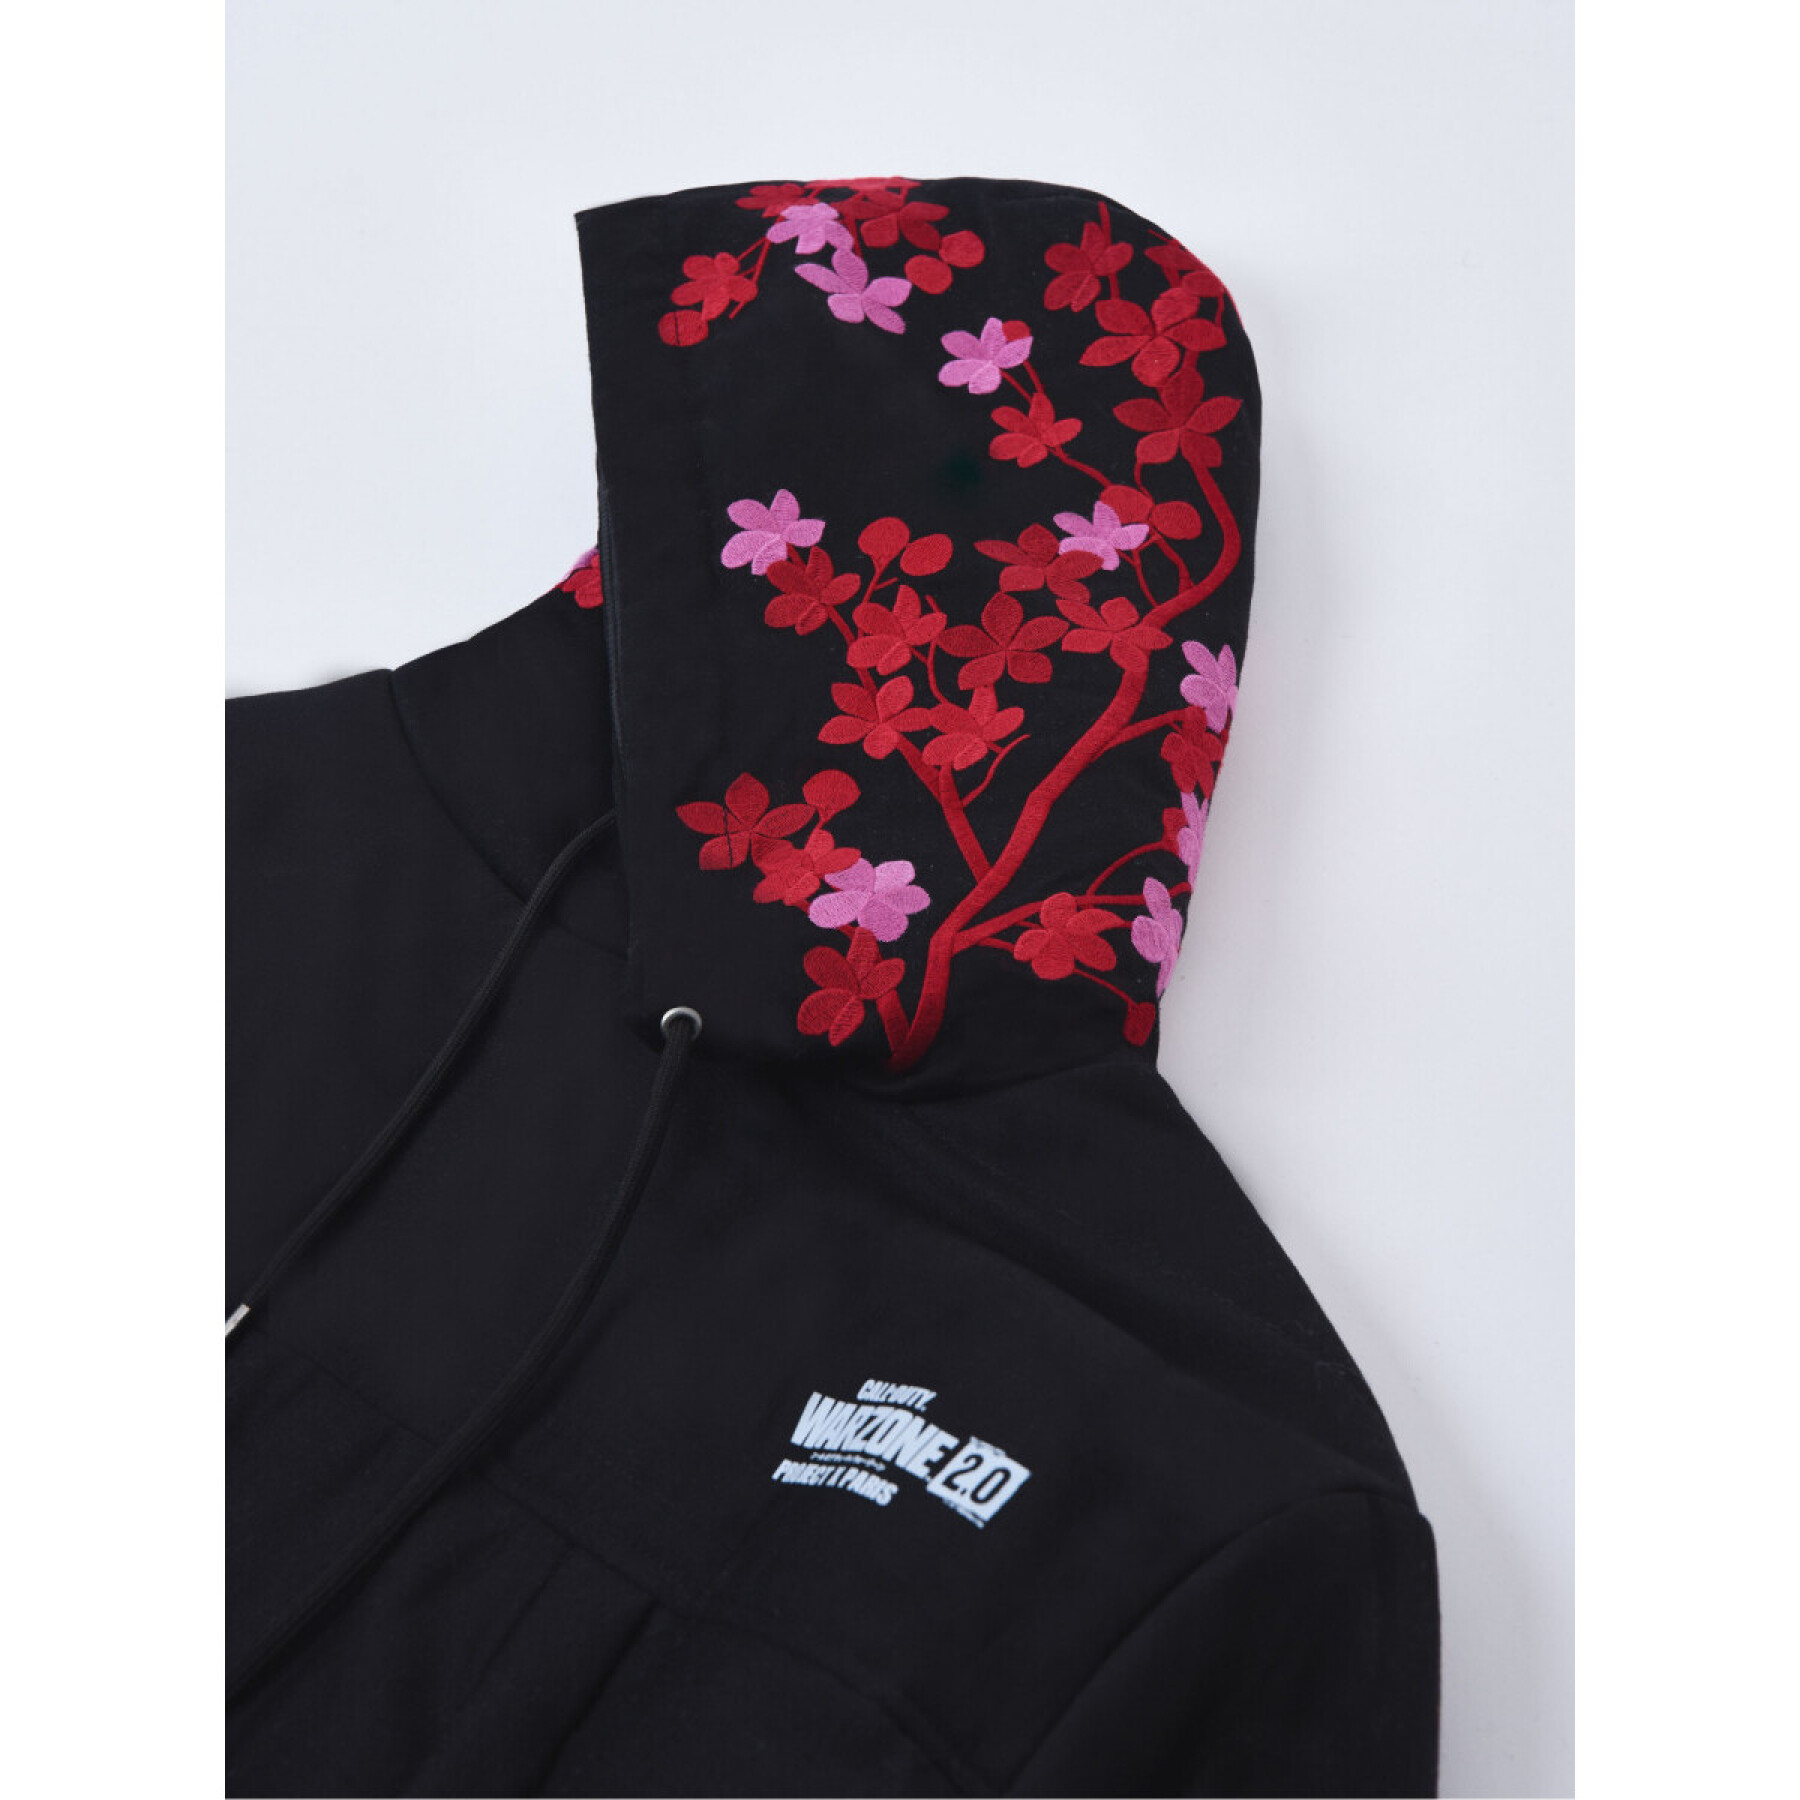 Hooded jacket with sakura embroidery Project X Paris Call Of Duty